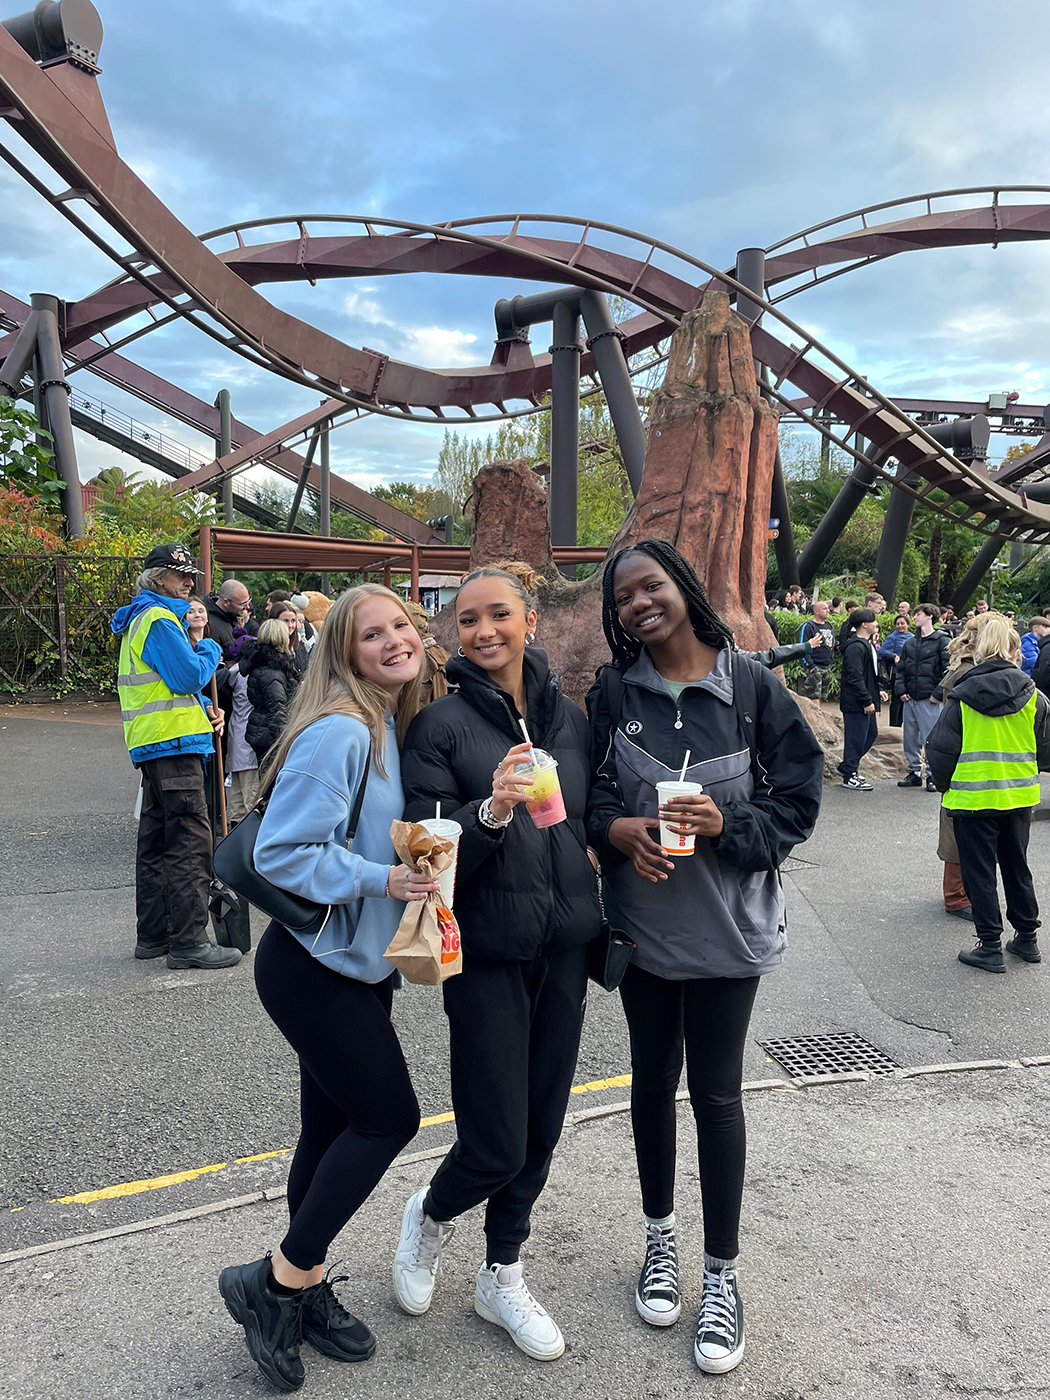 Halloween trip to Thorpe Park for Health & Social Care students